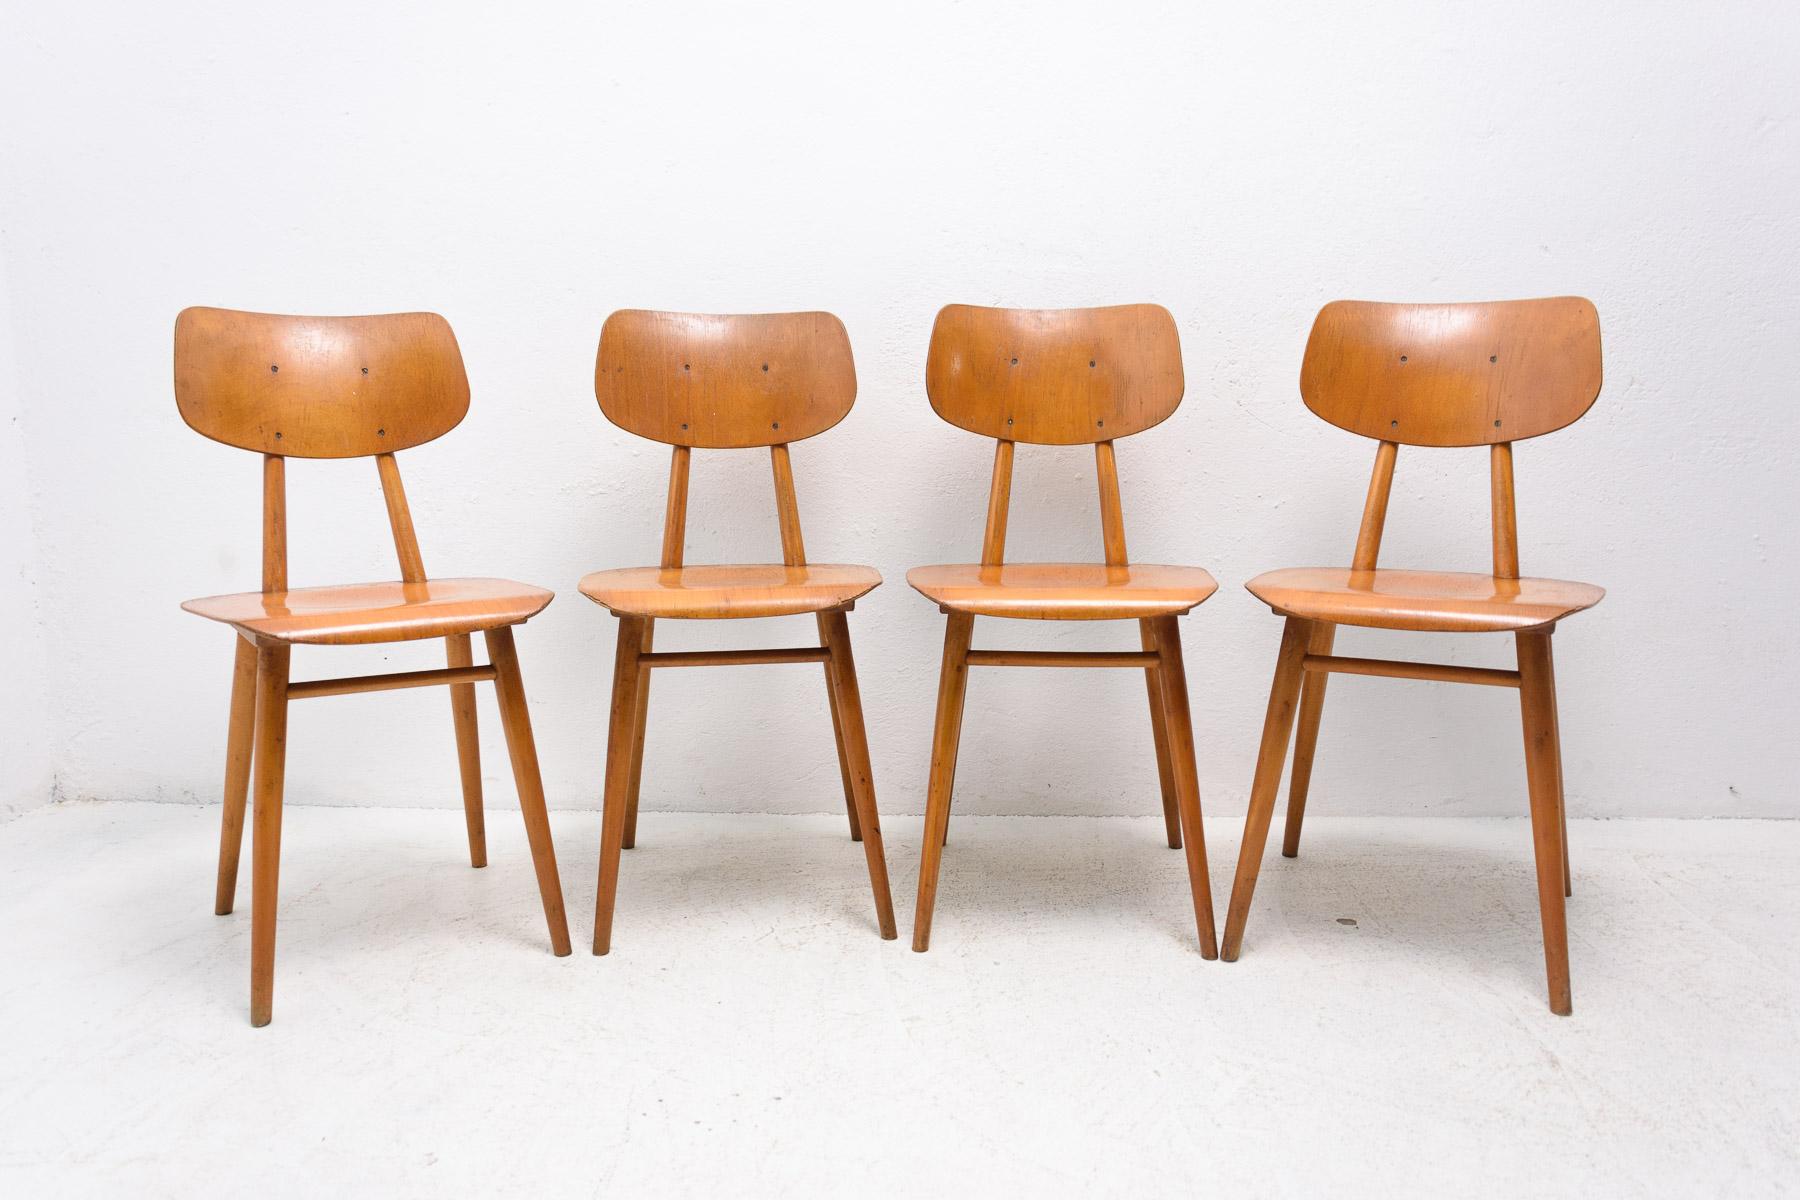 Set of four patinated dining chairs from the 1960´s. It was produced by TON, Czechoslovakia. The TON company was established as successor to the famous Thonet after World War II in Czechoslovakia and continued the production of bentwood furniture.